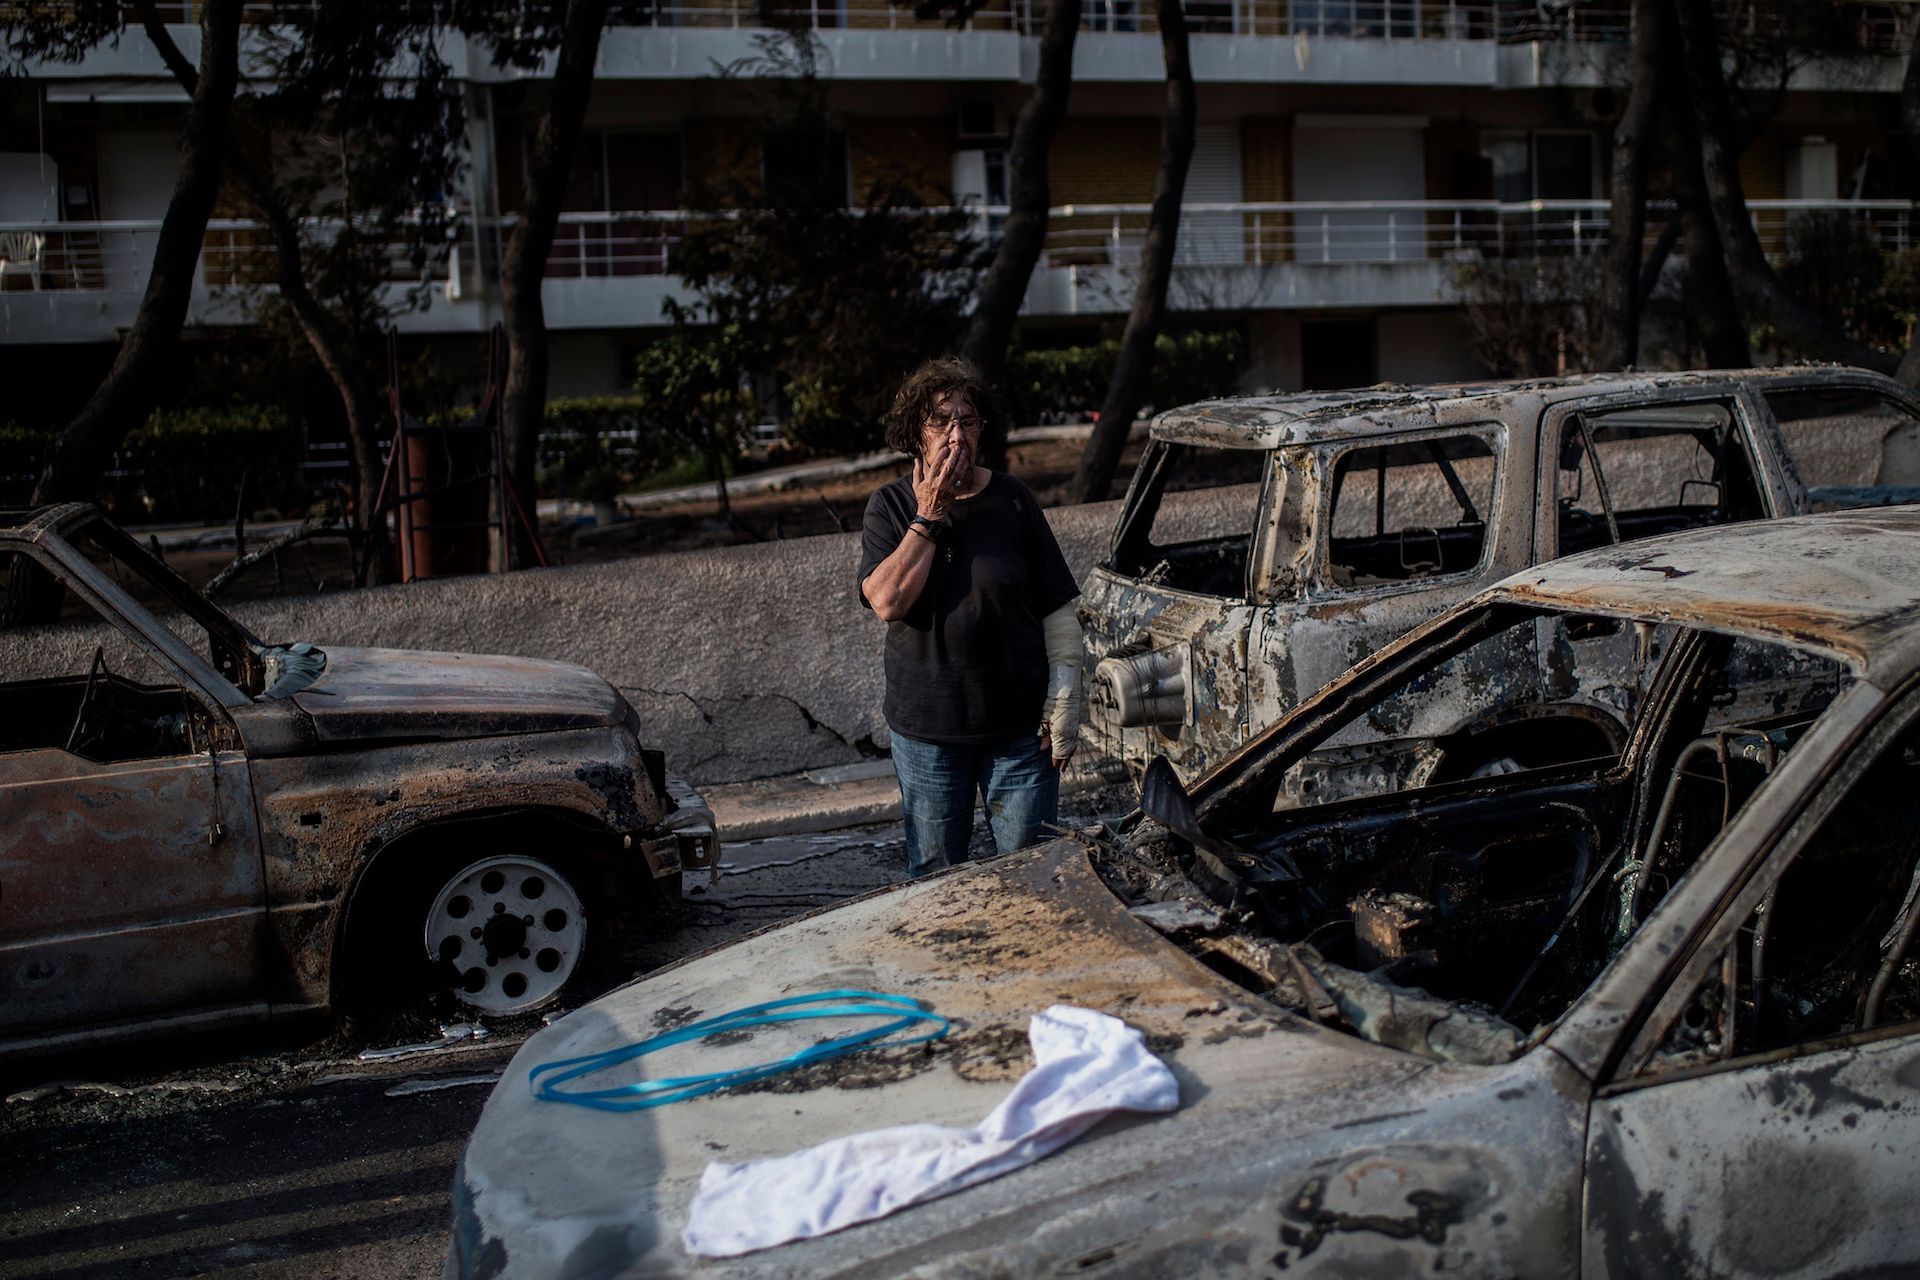 A woman with a cast stands among cars burnt following a wildfire at the village of Mati, near Athens, on July 24, 2018.